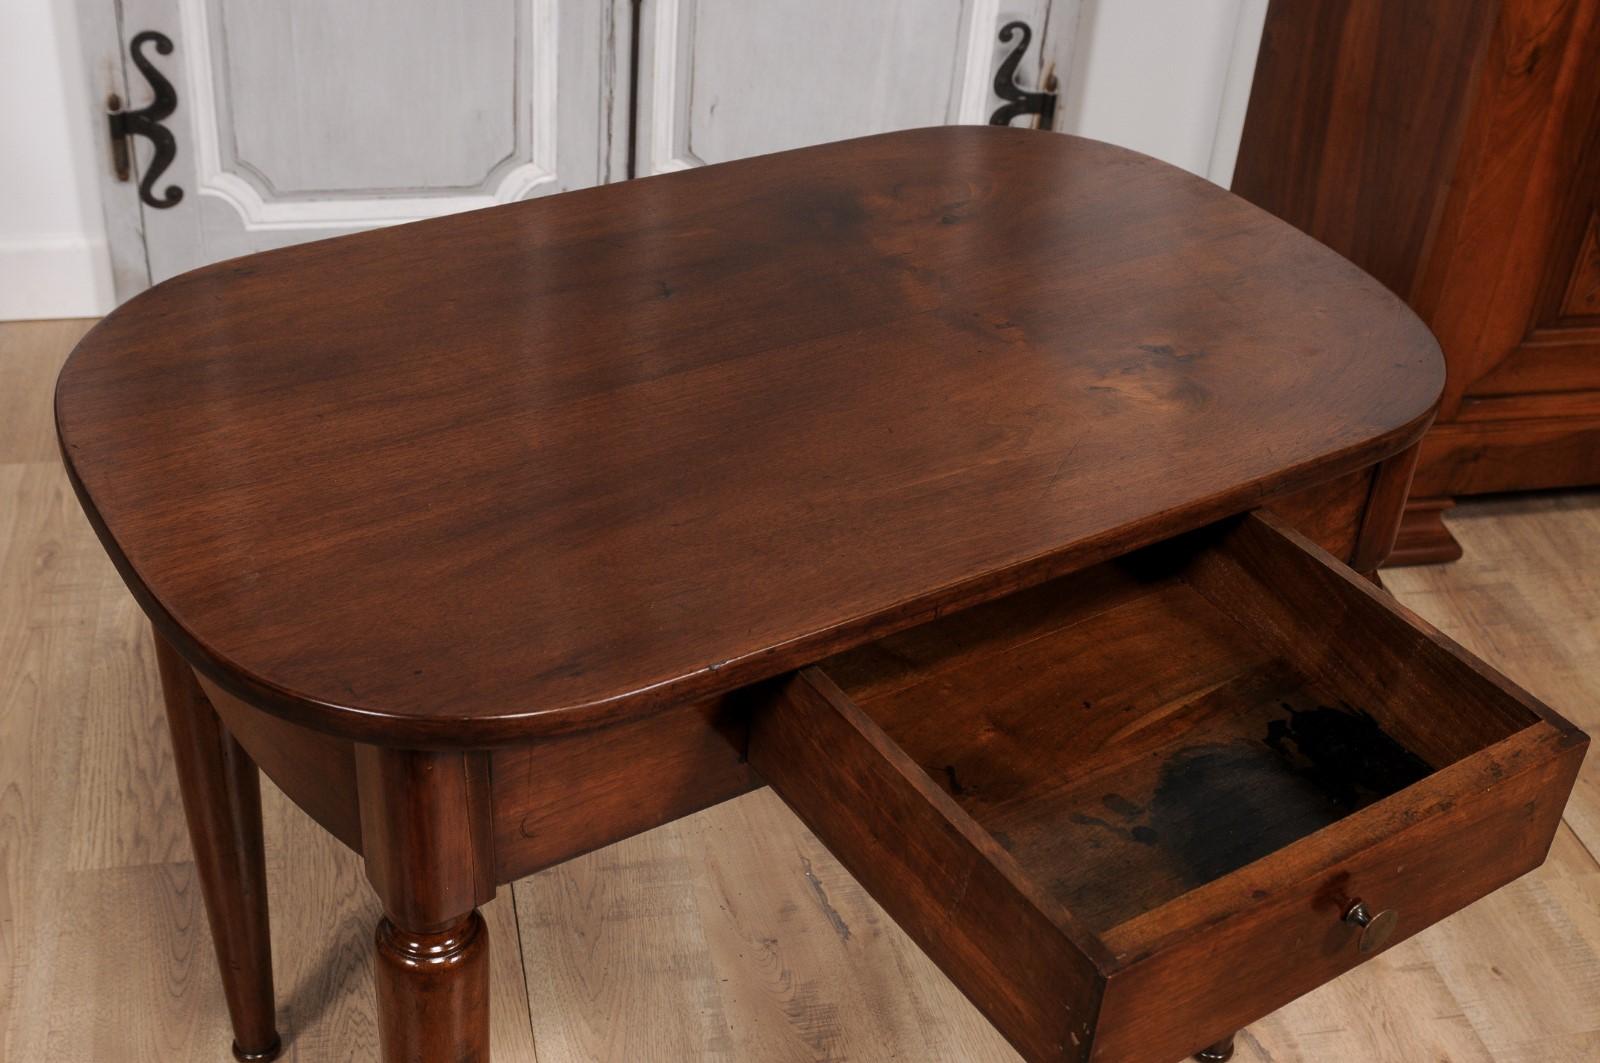 Italian Walnut 1890s Side Table with Oval Top, One Drawer and Cylindrical Legs For Sale 3